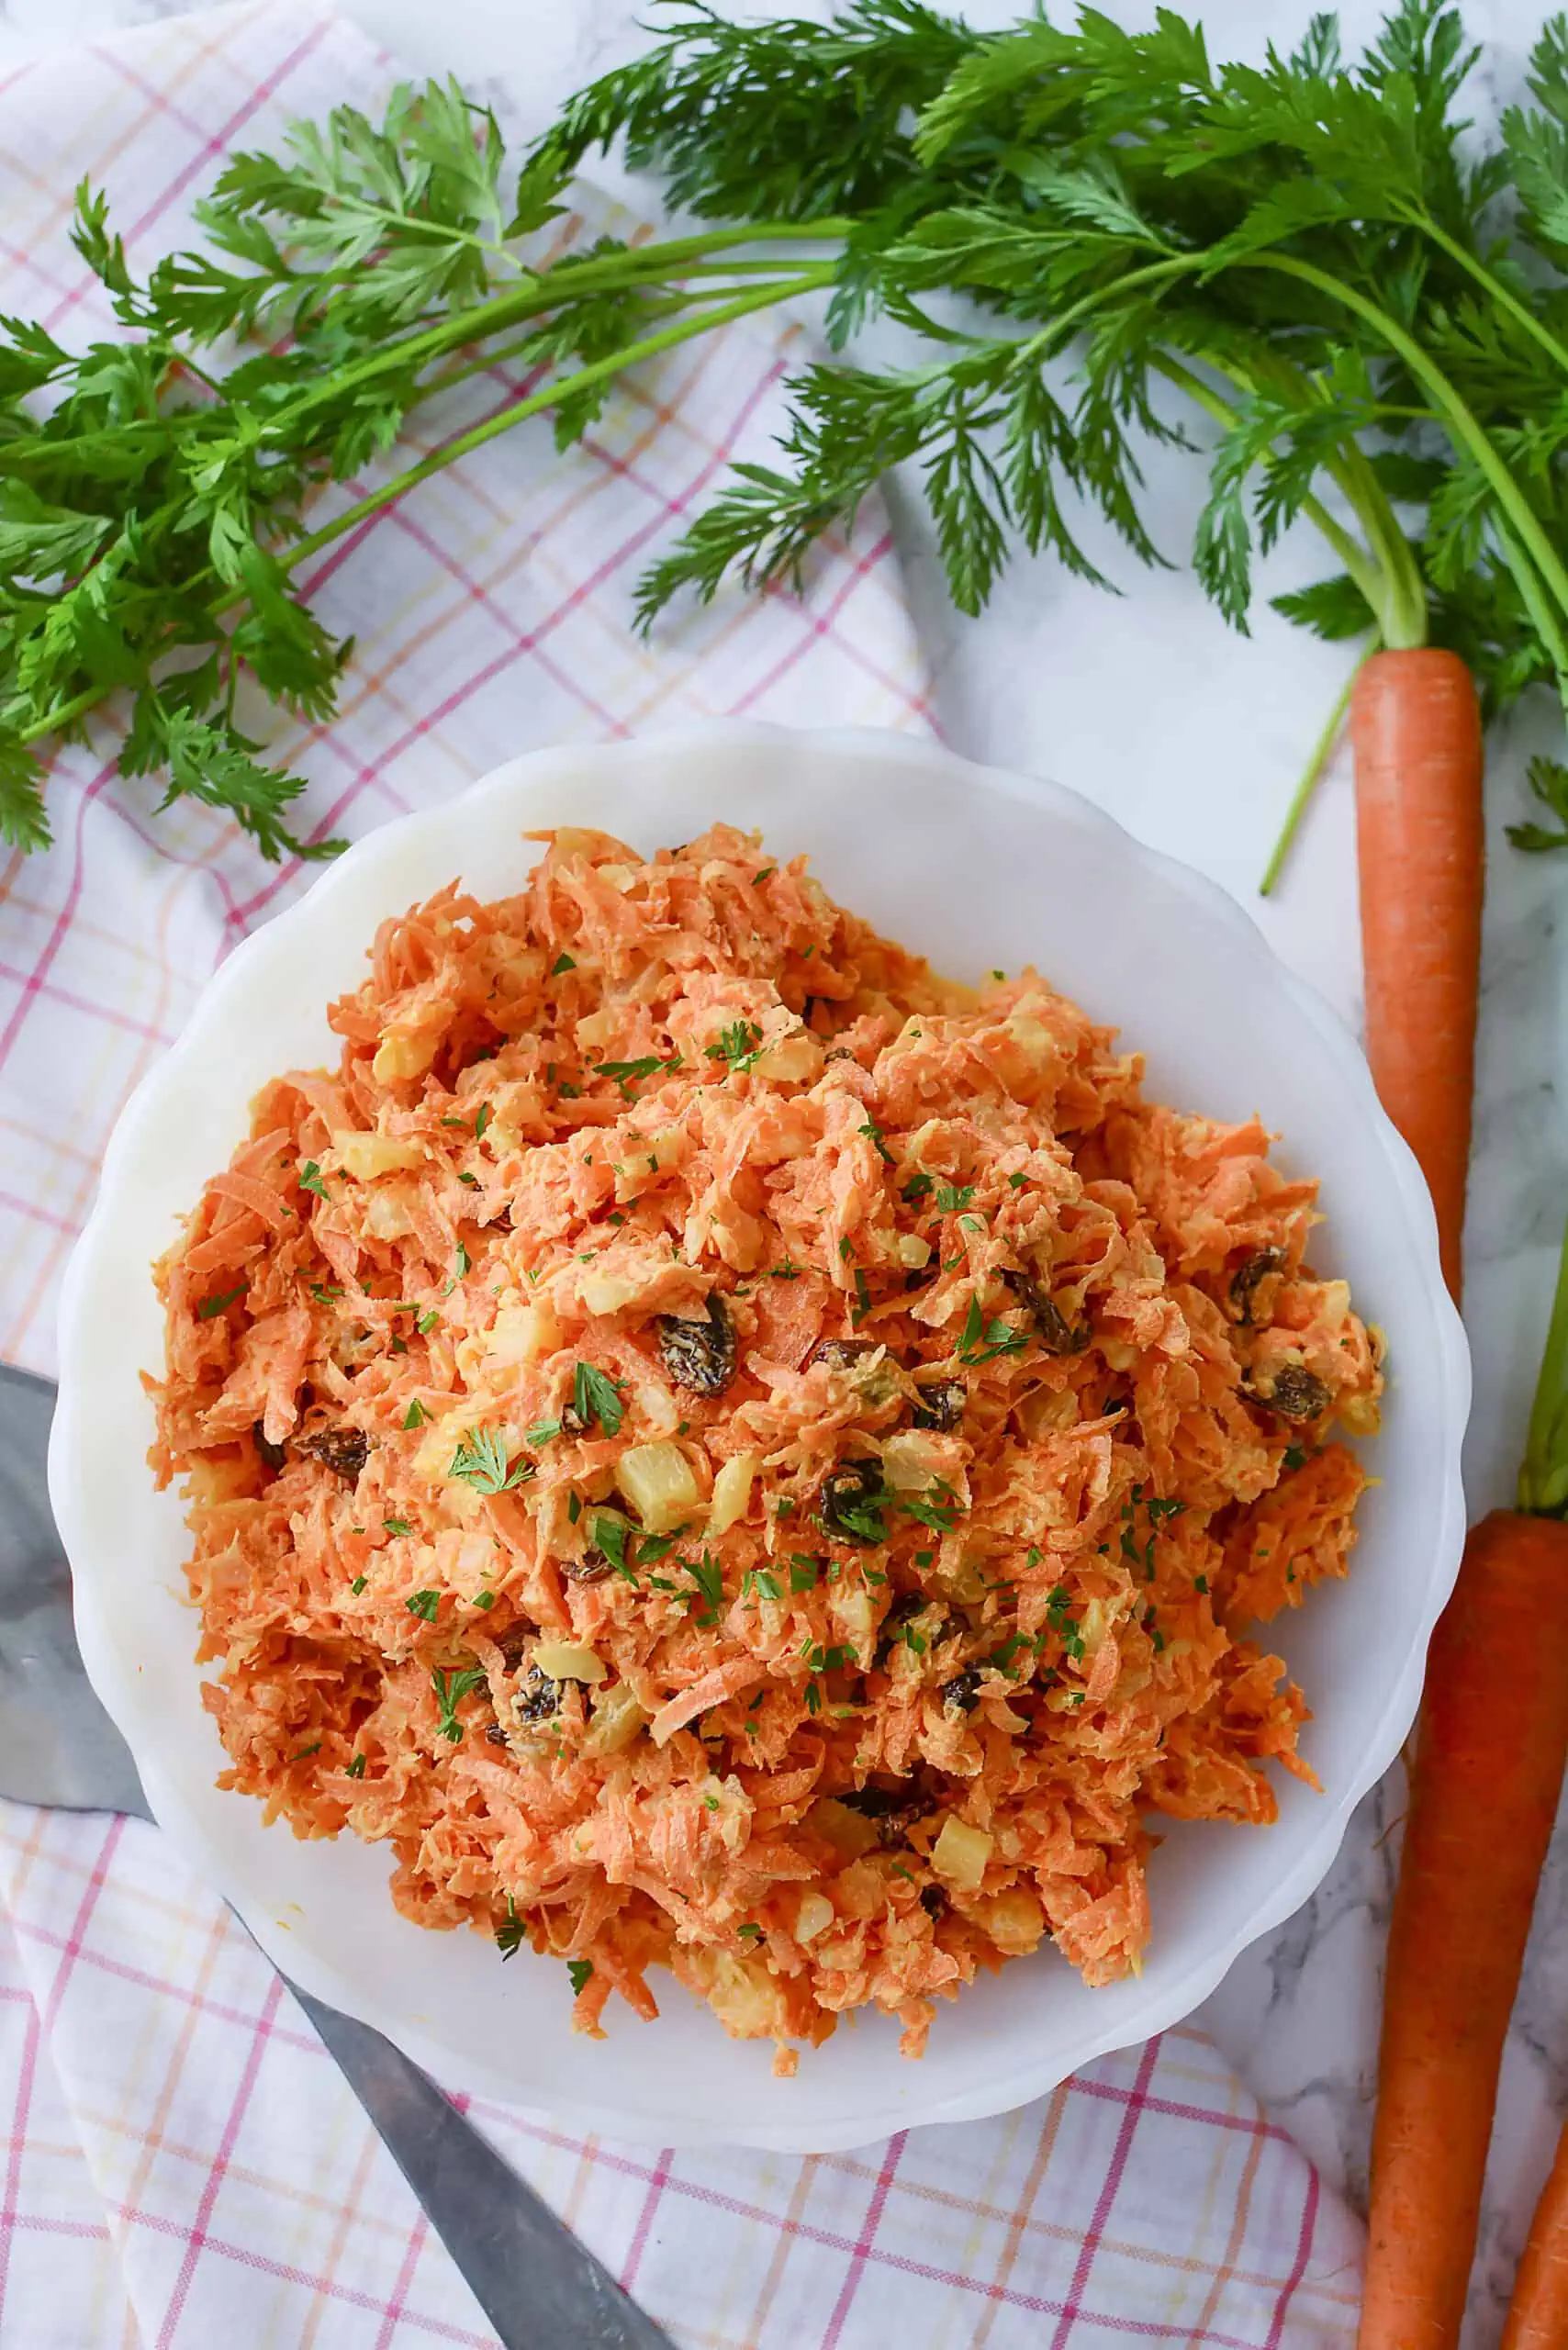 An overhead photo of the carrot salad with whole carrots draped above the bowl on the table. 